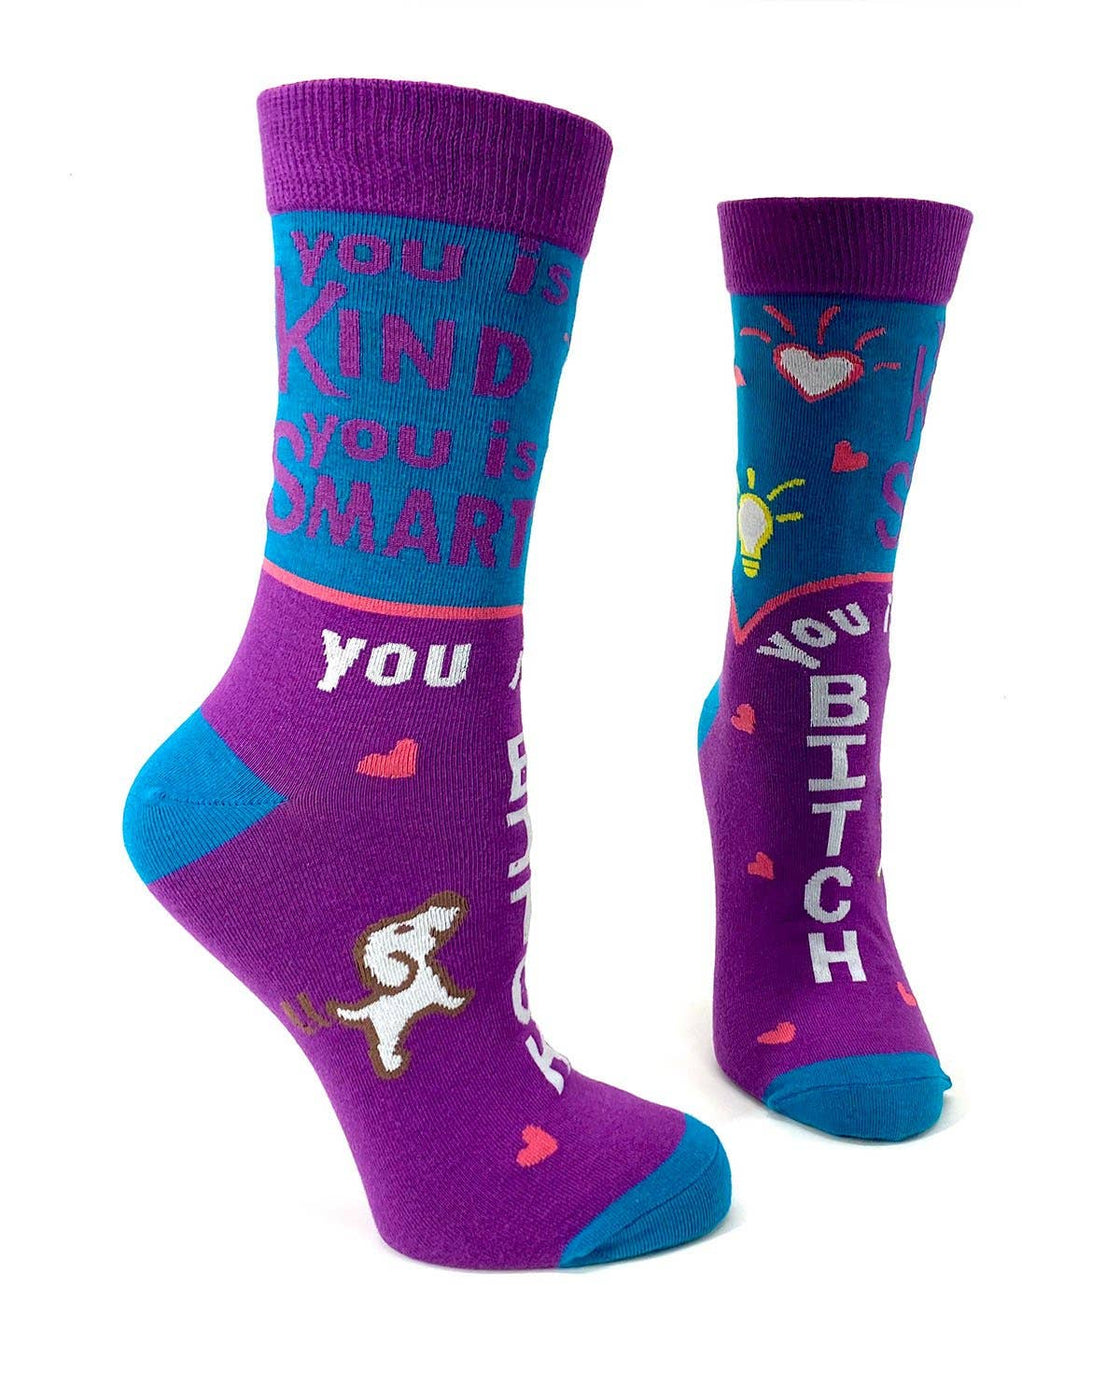 You is Kind, You is Smart, You is a Bitch Women's Crew Socks